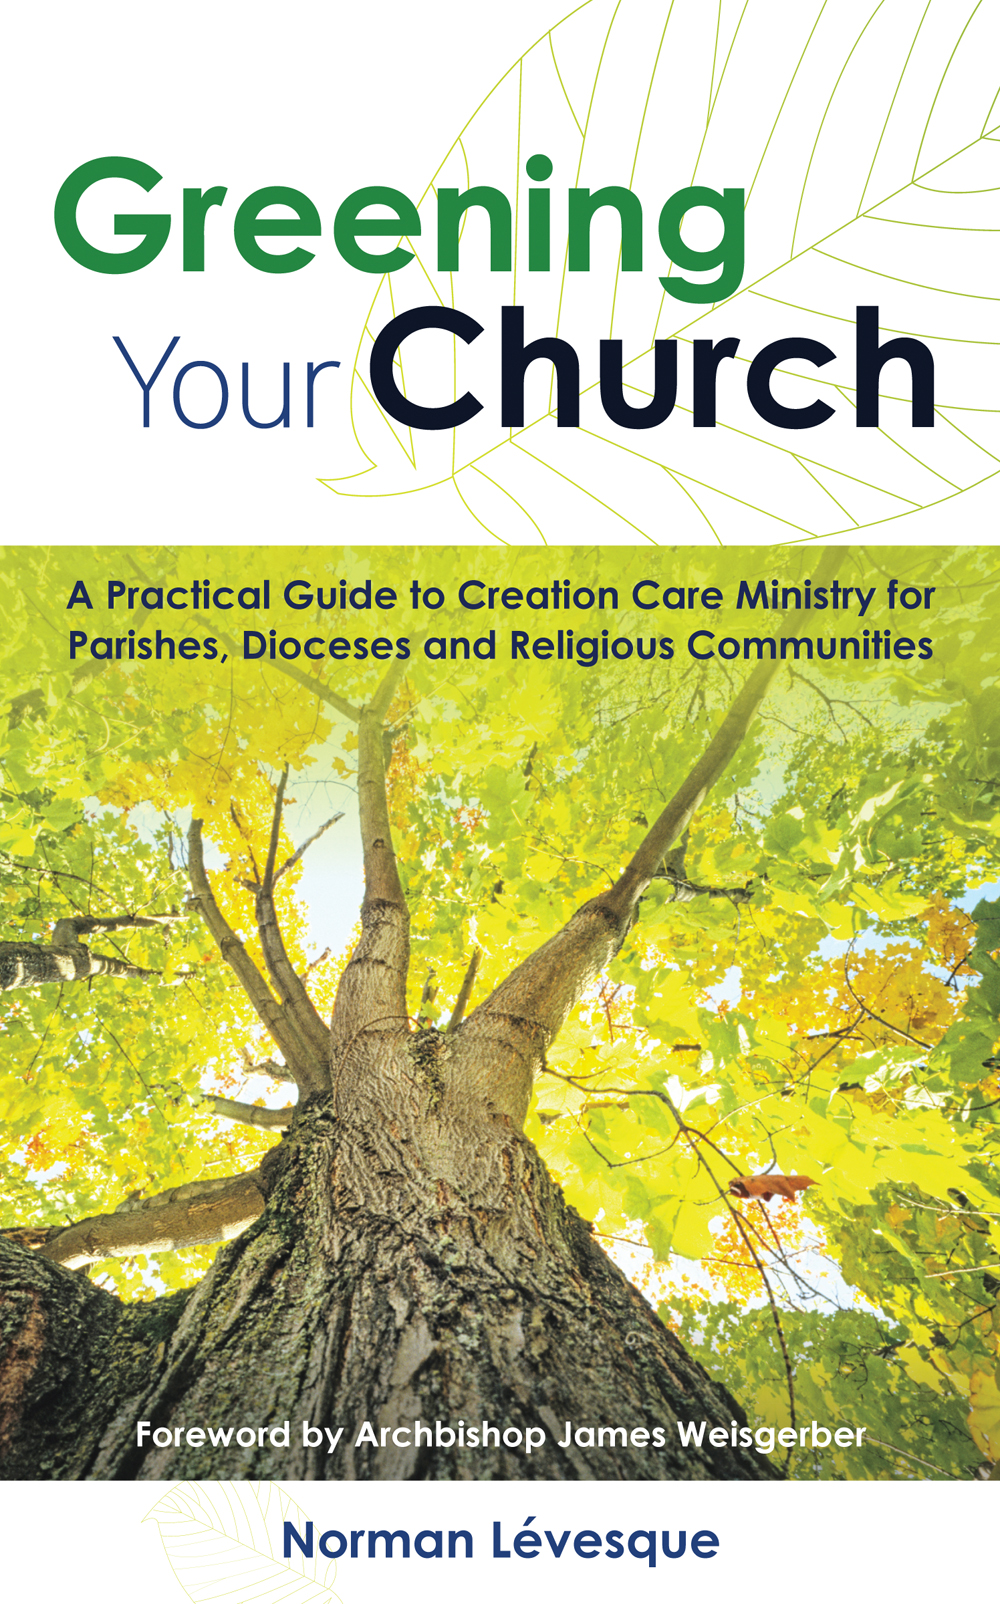 Greening Your Church: A Practical Guide to Creation Care Ministry for Parishes, Dioceses and Religious Communities